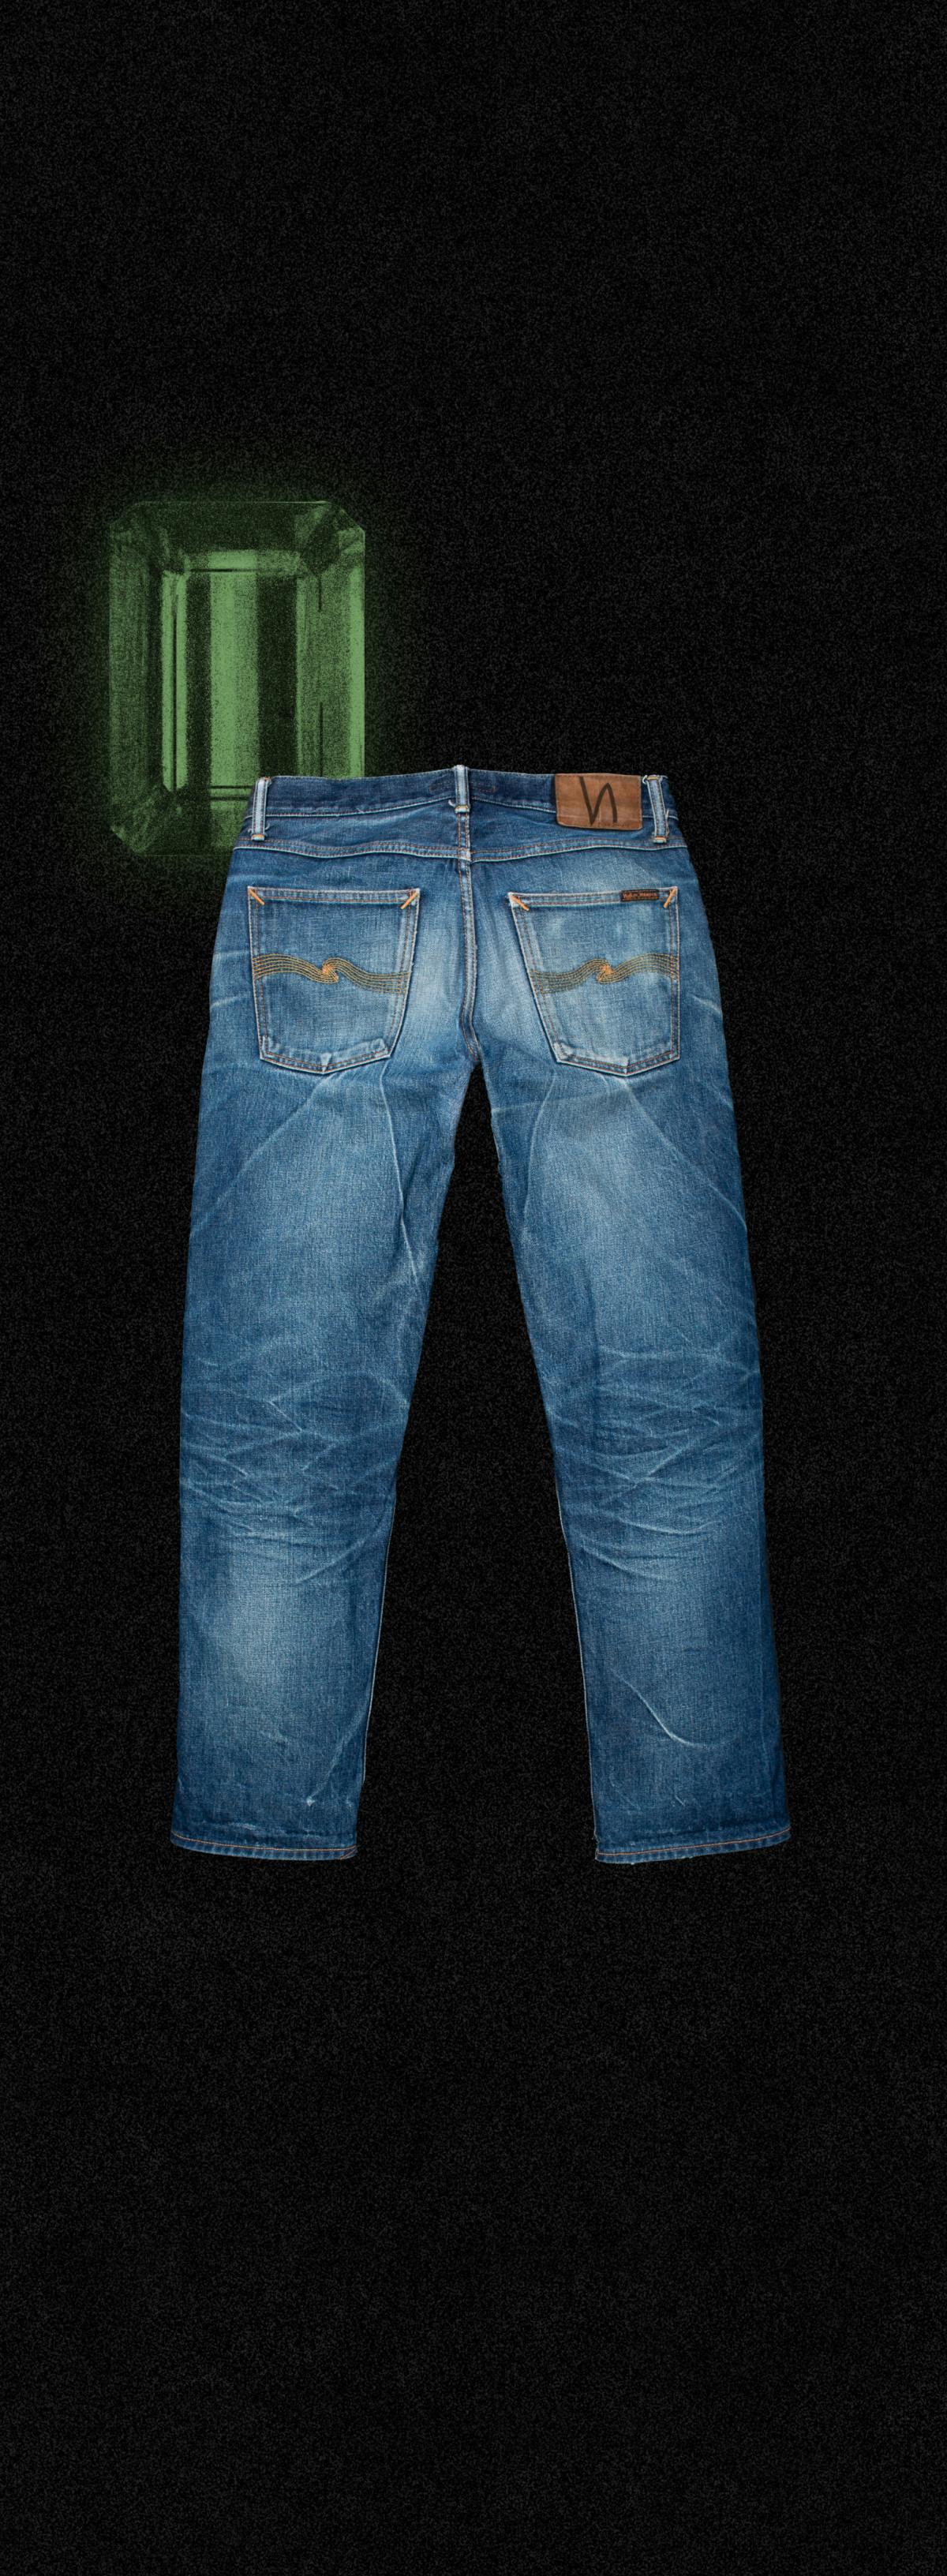 Emerald selvage worn in